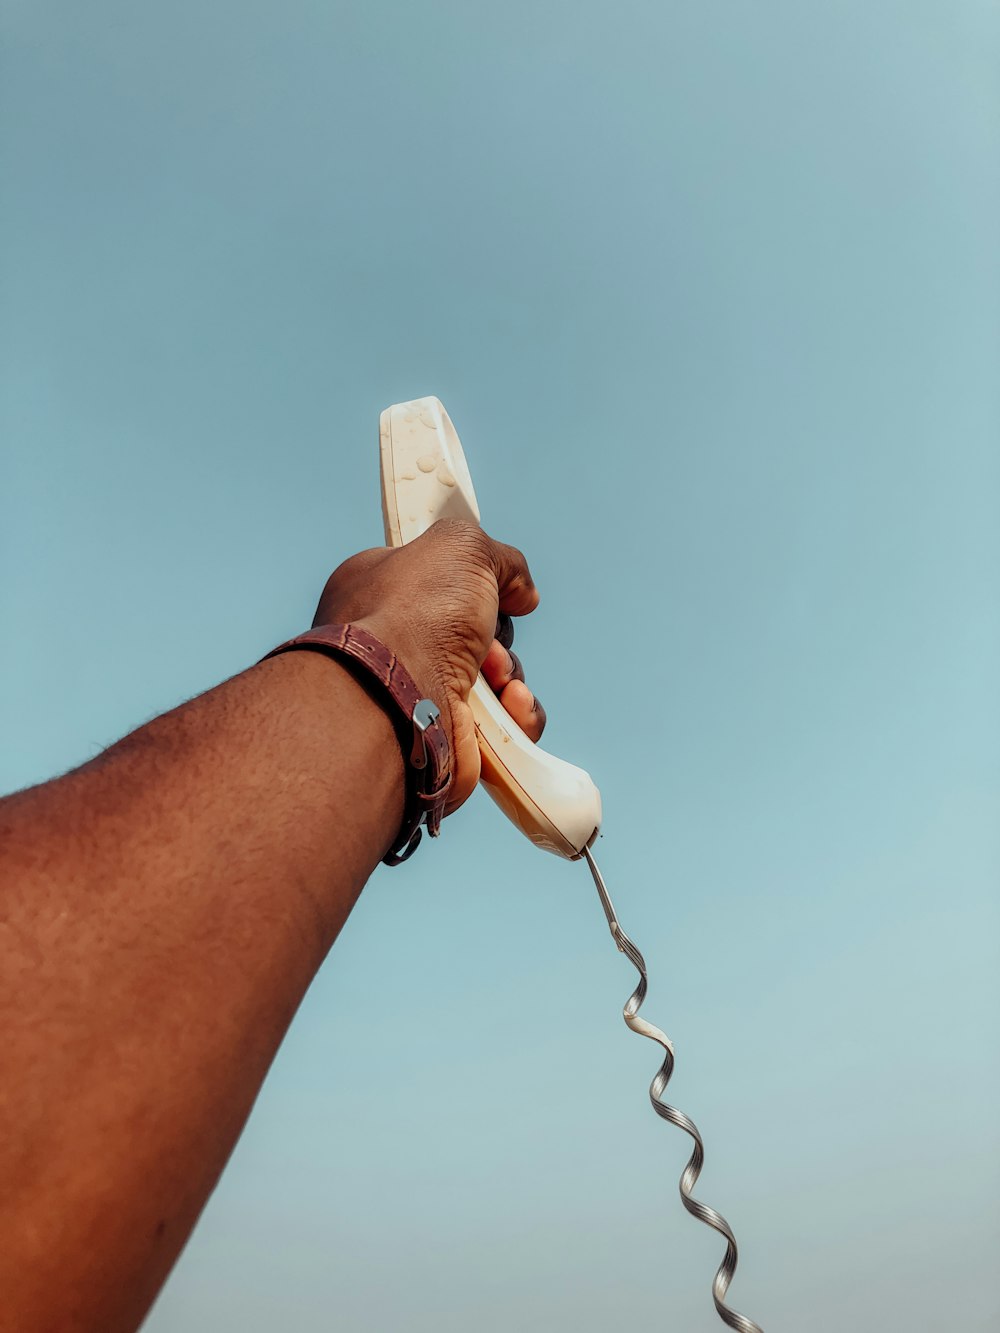 person holding white corded telephone